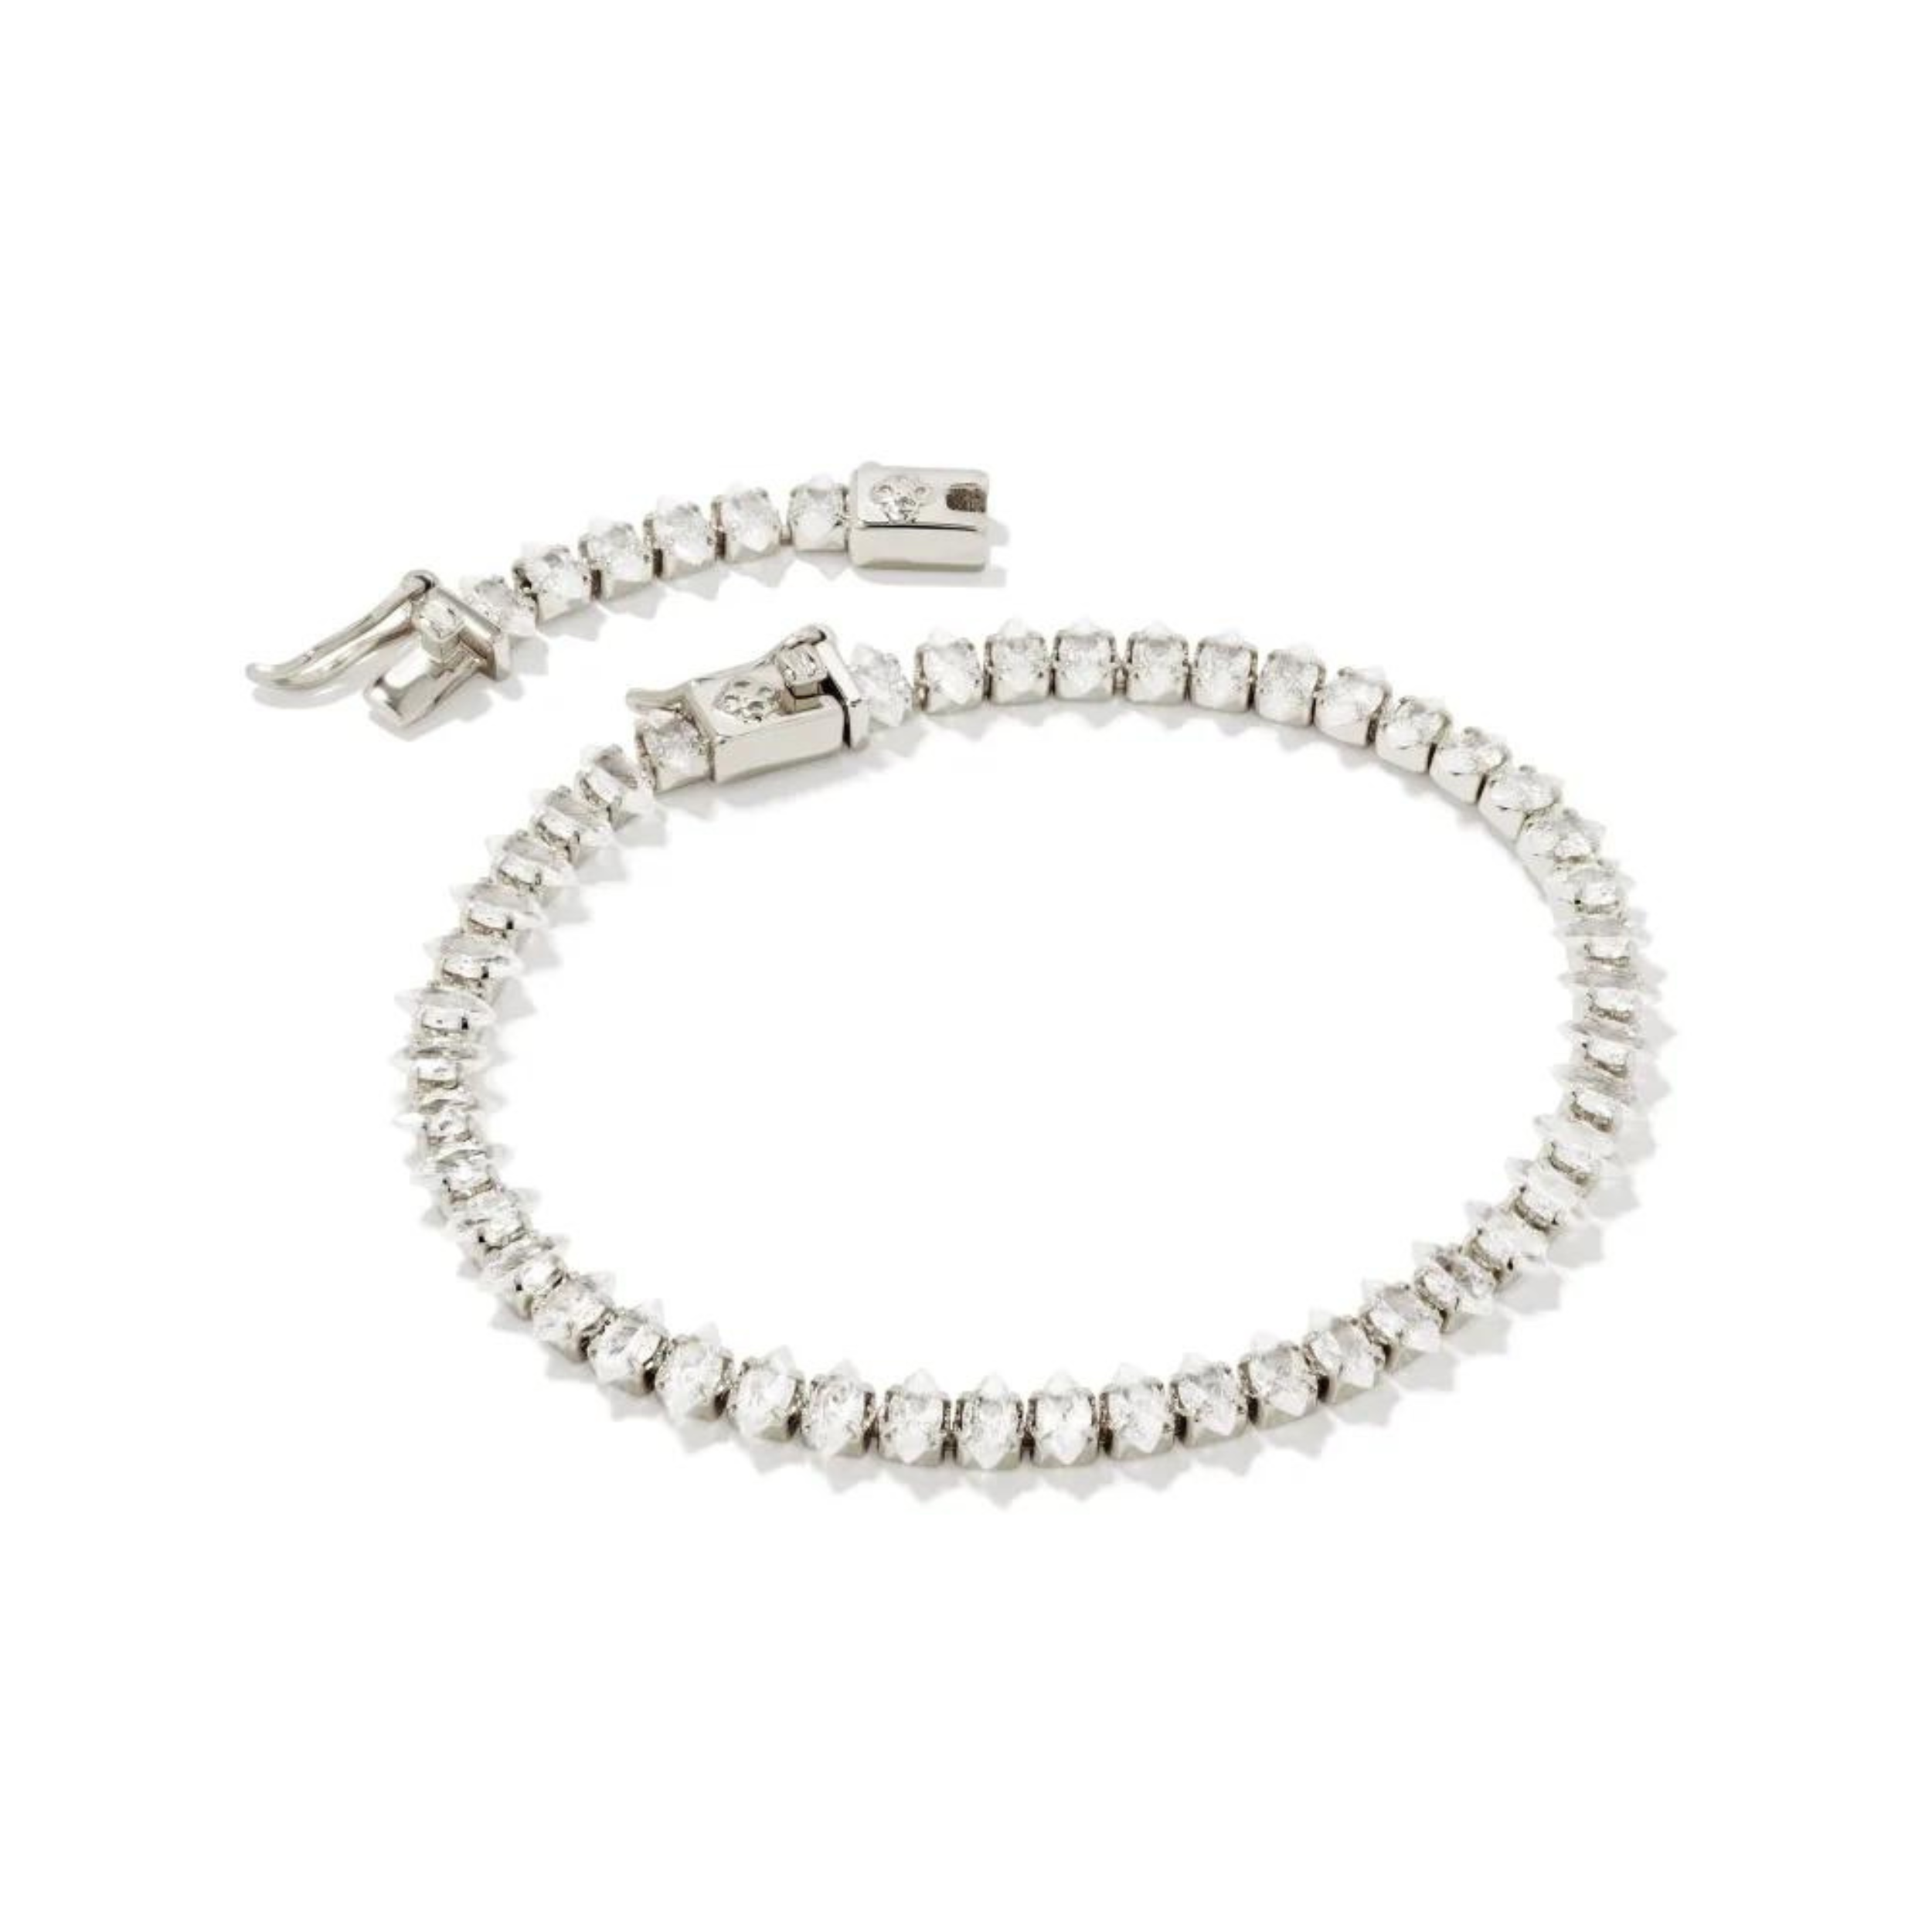 Pictured is a clear crystal tennis bracelet in silver on a white background.